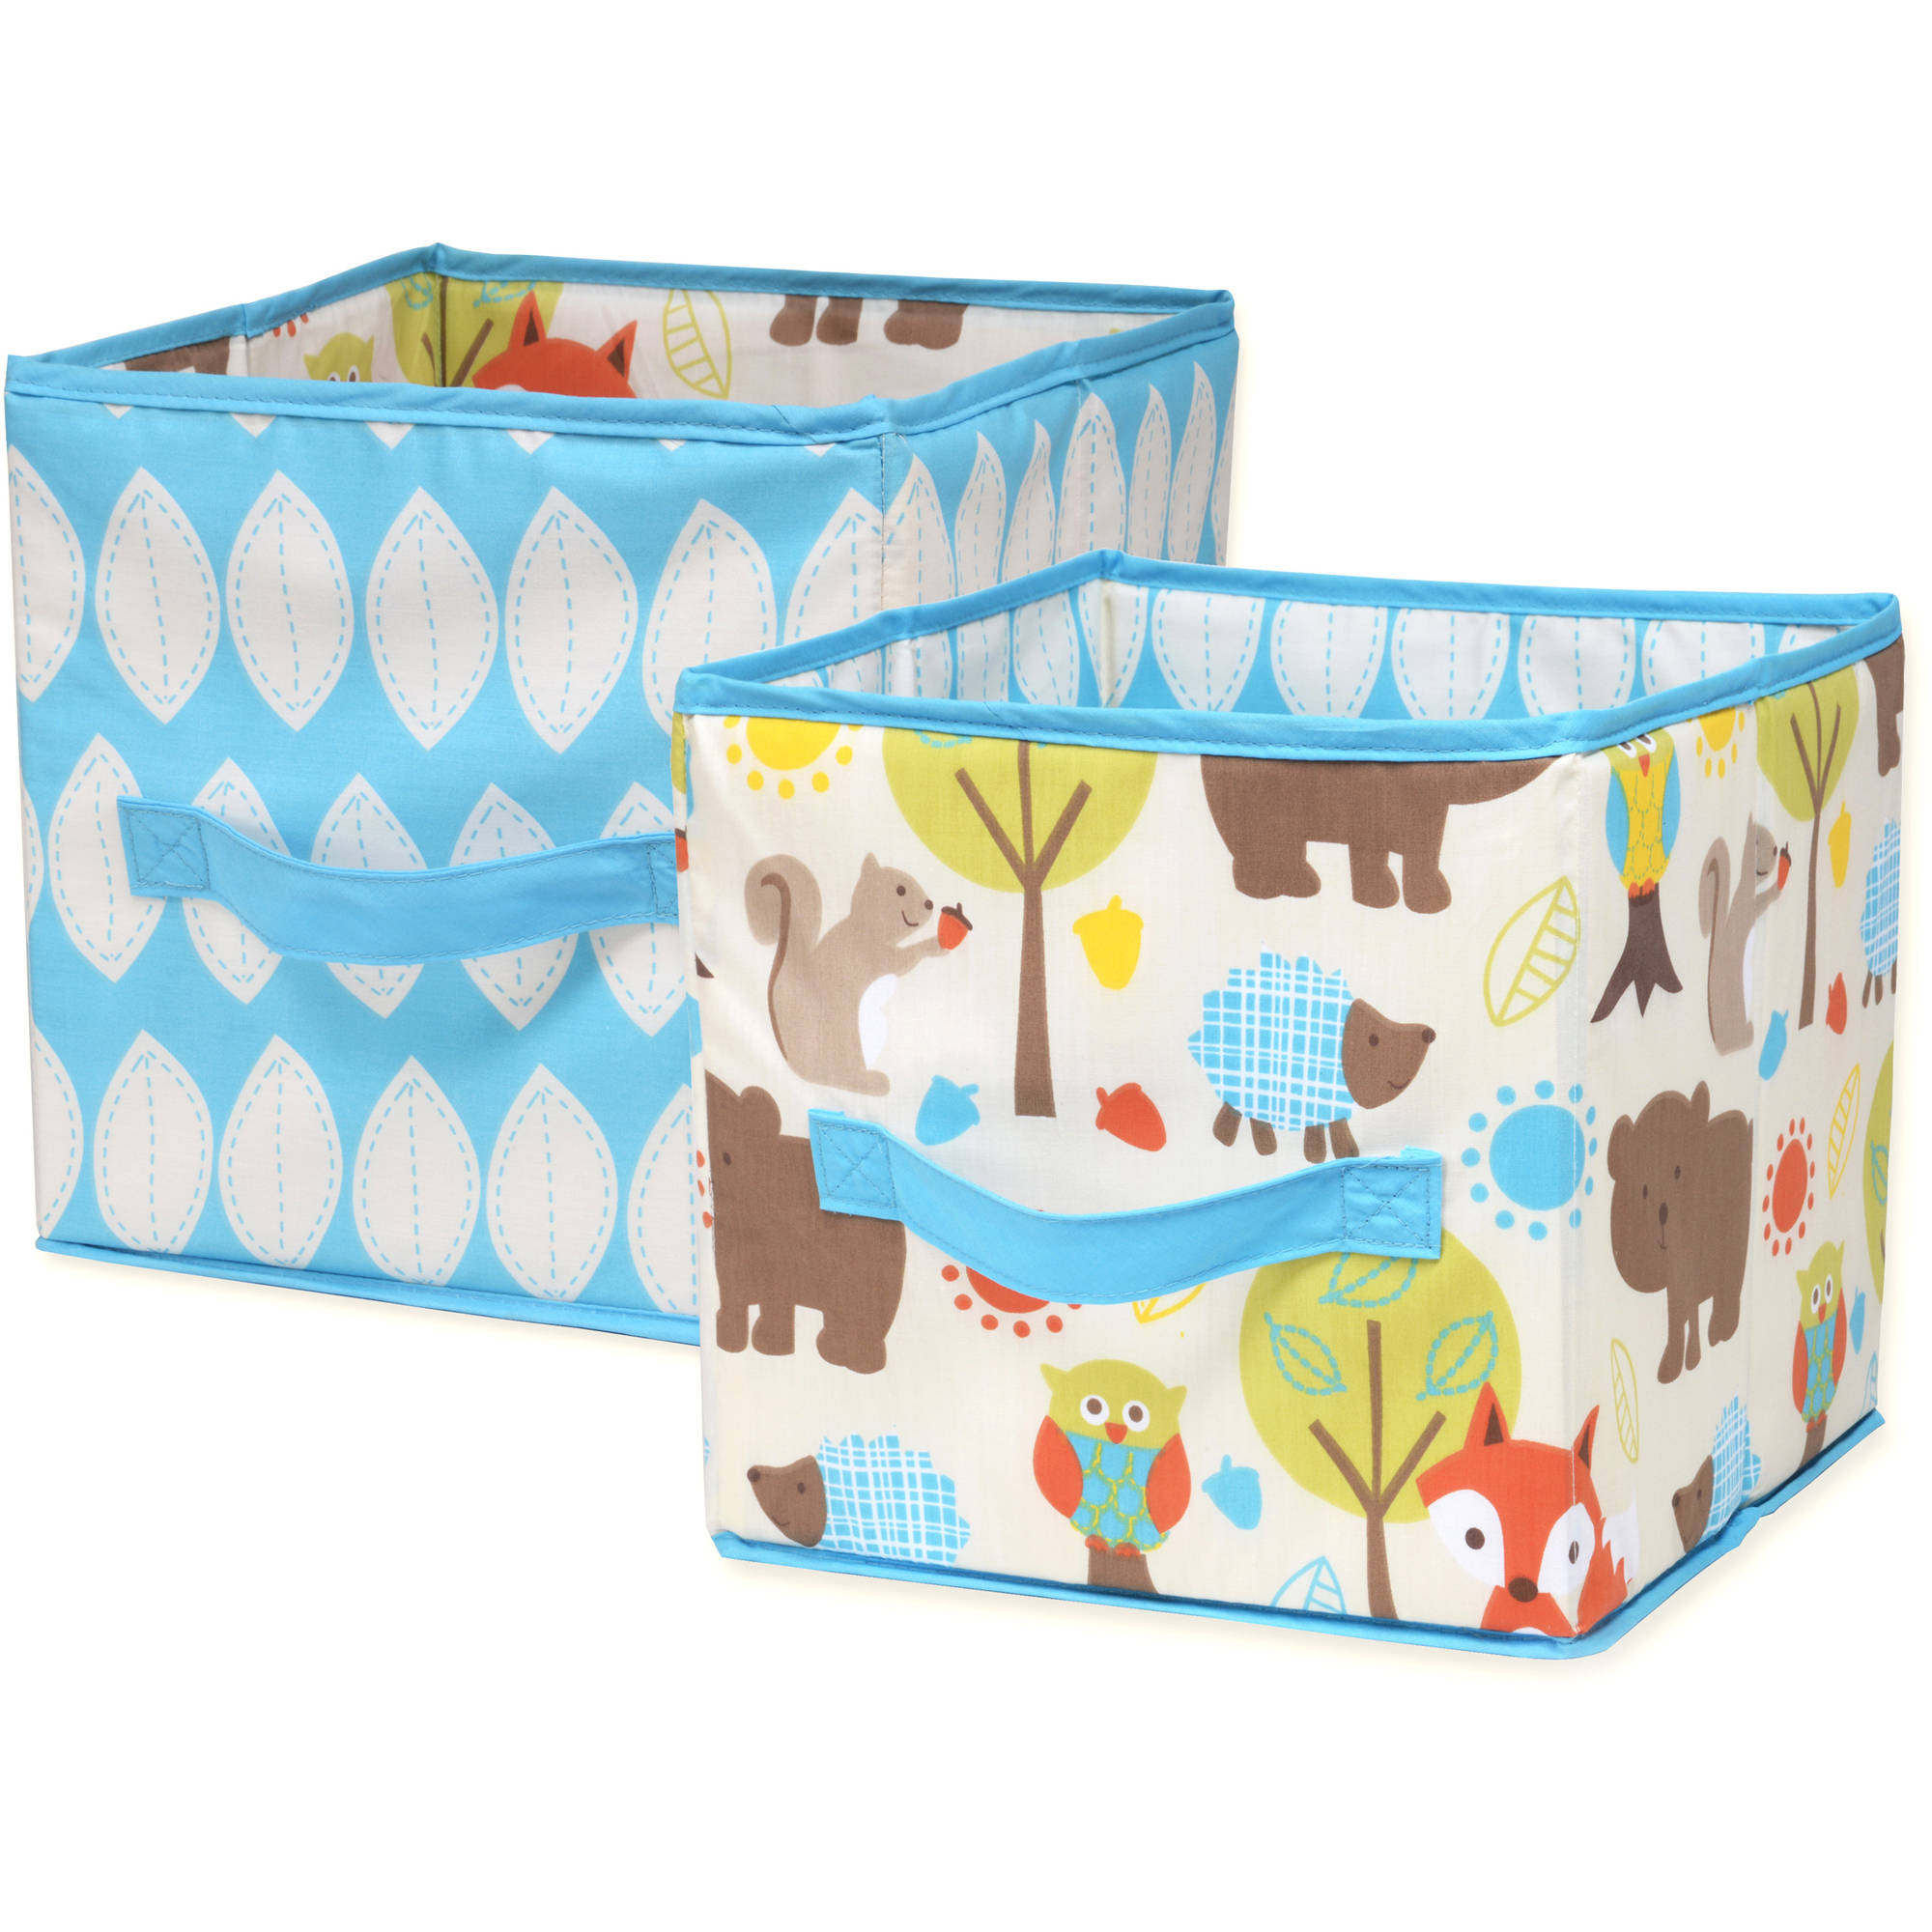 Ideas Cute Storage Bins Cube For Stuff Organizer Ideas intended for size 2000 X 2000